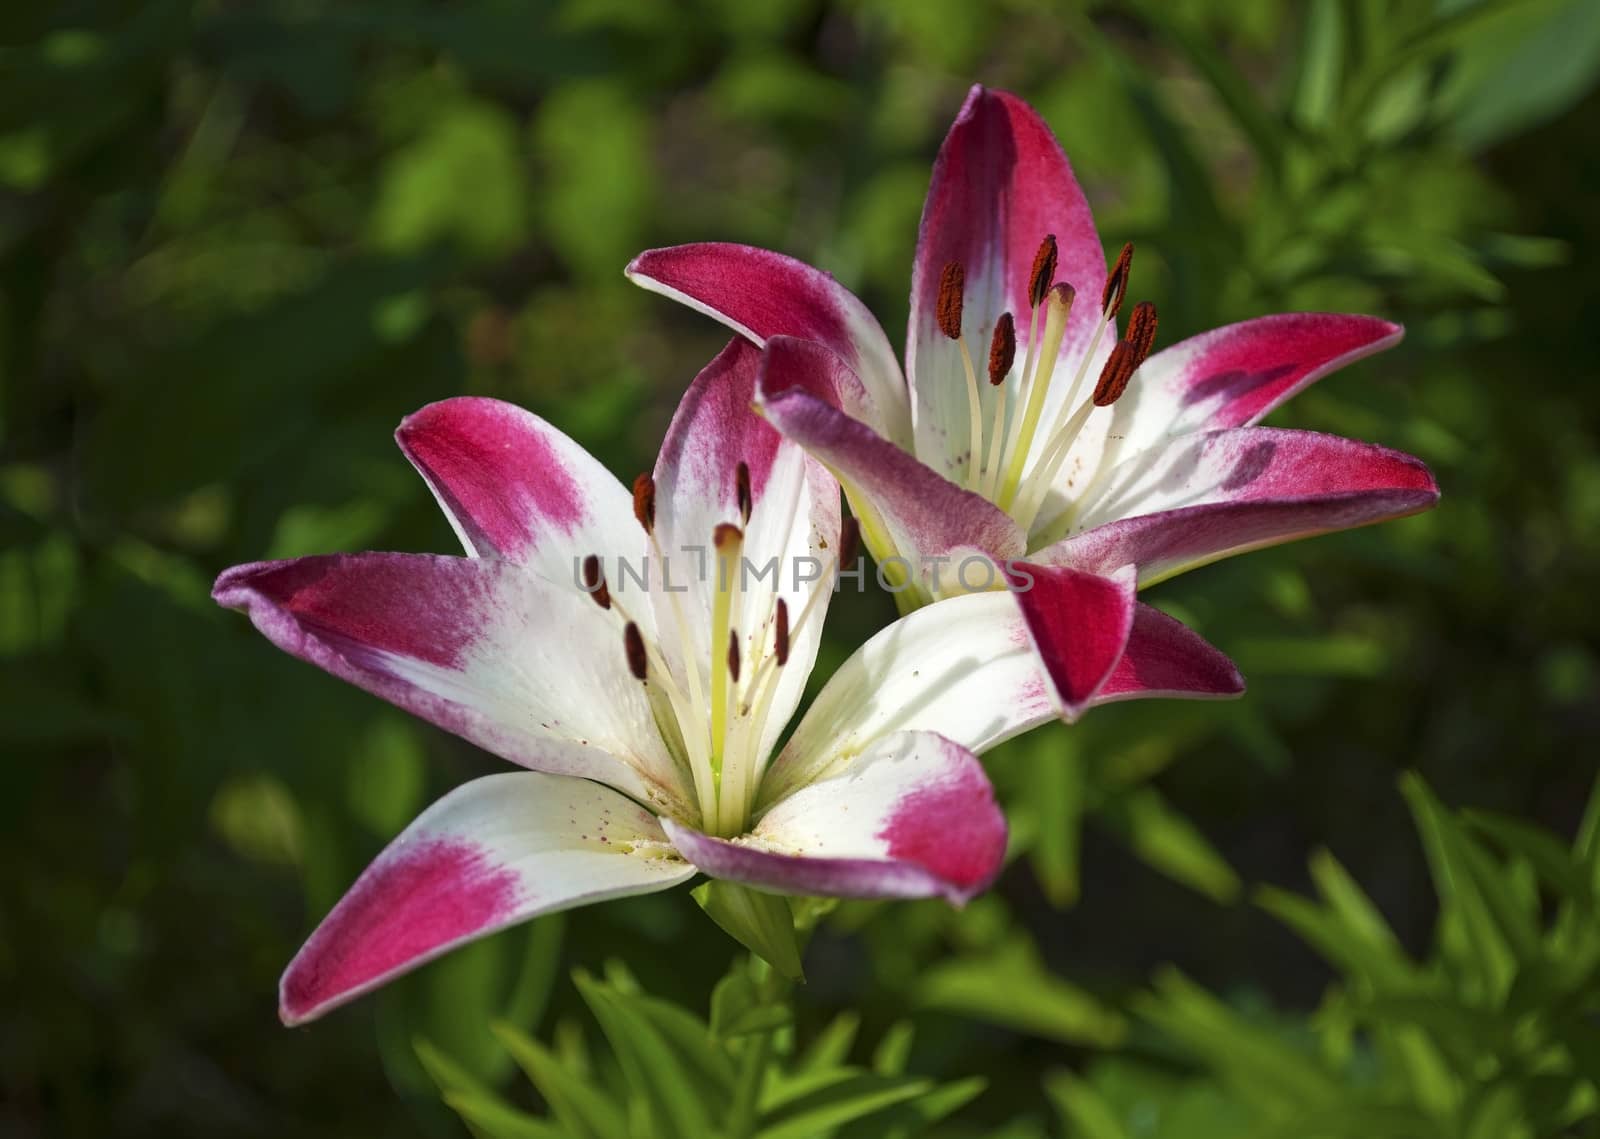 Two blooming lilies in the garden